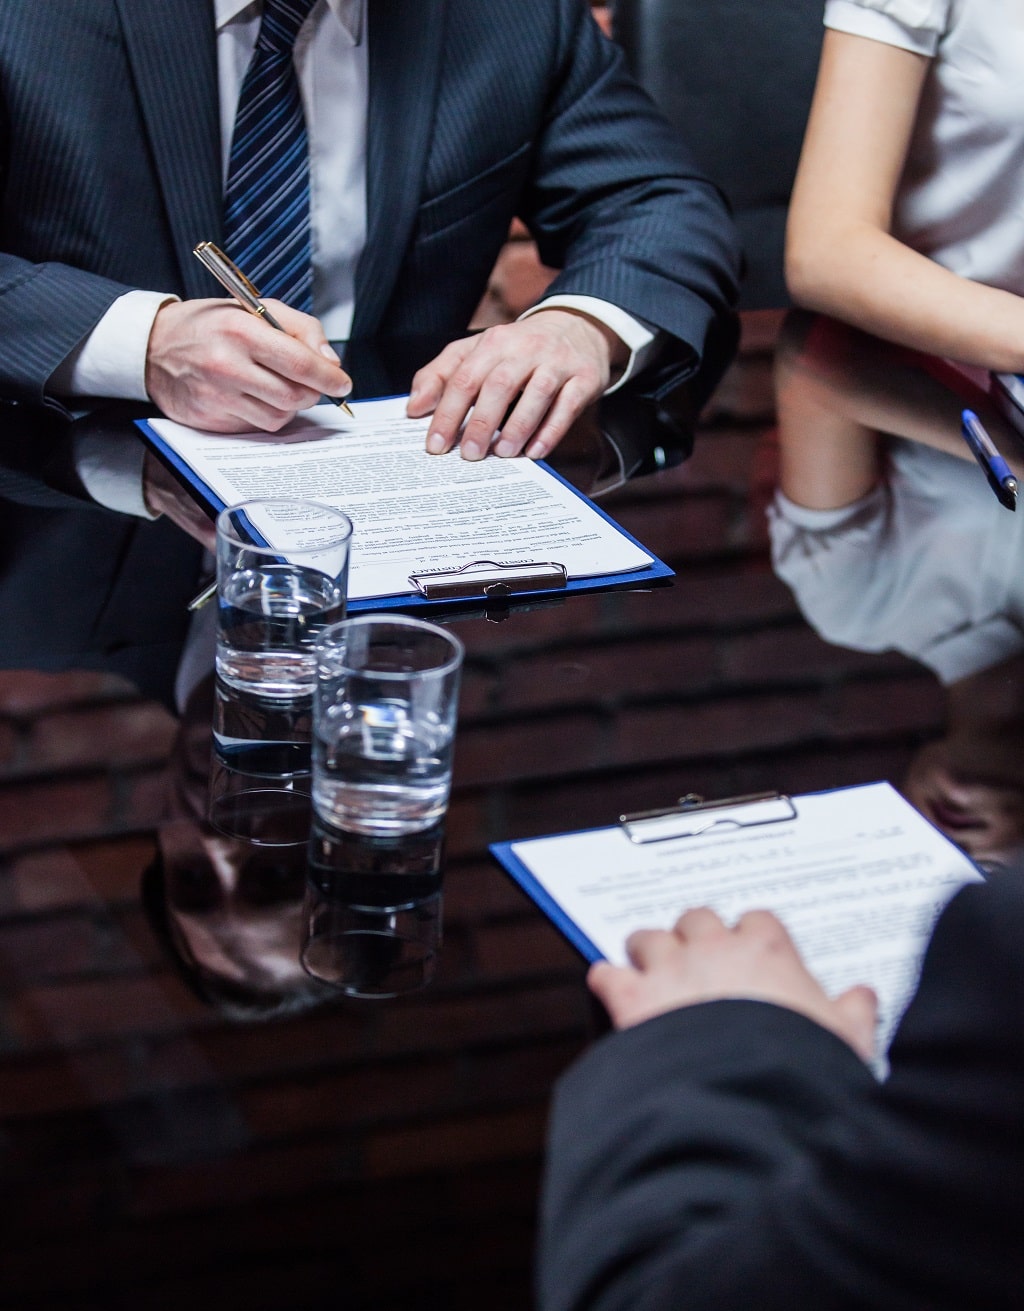 A businessman and businesswoman sign an agreement at a table with another businessman across from them.